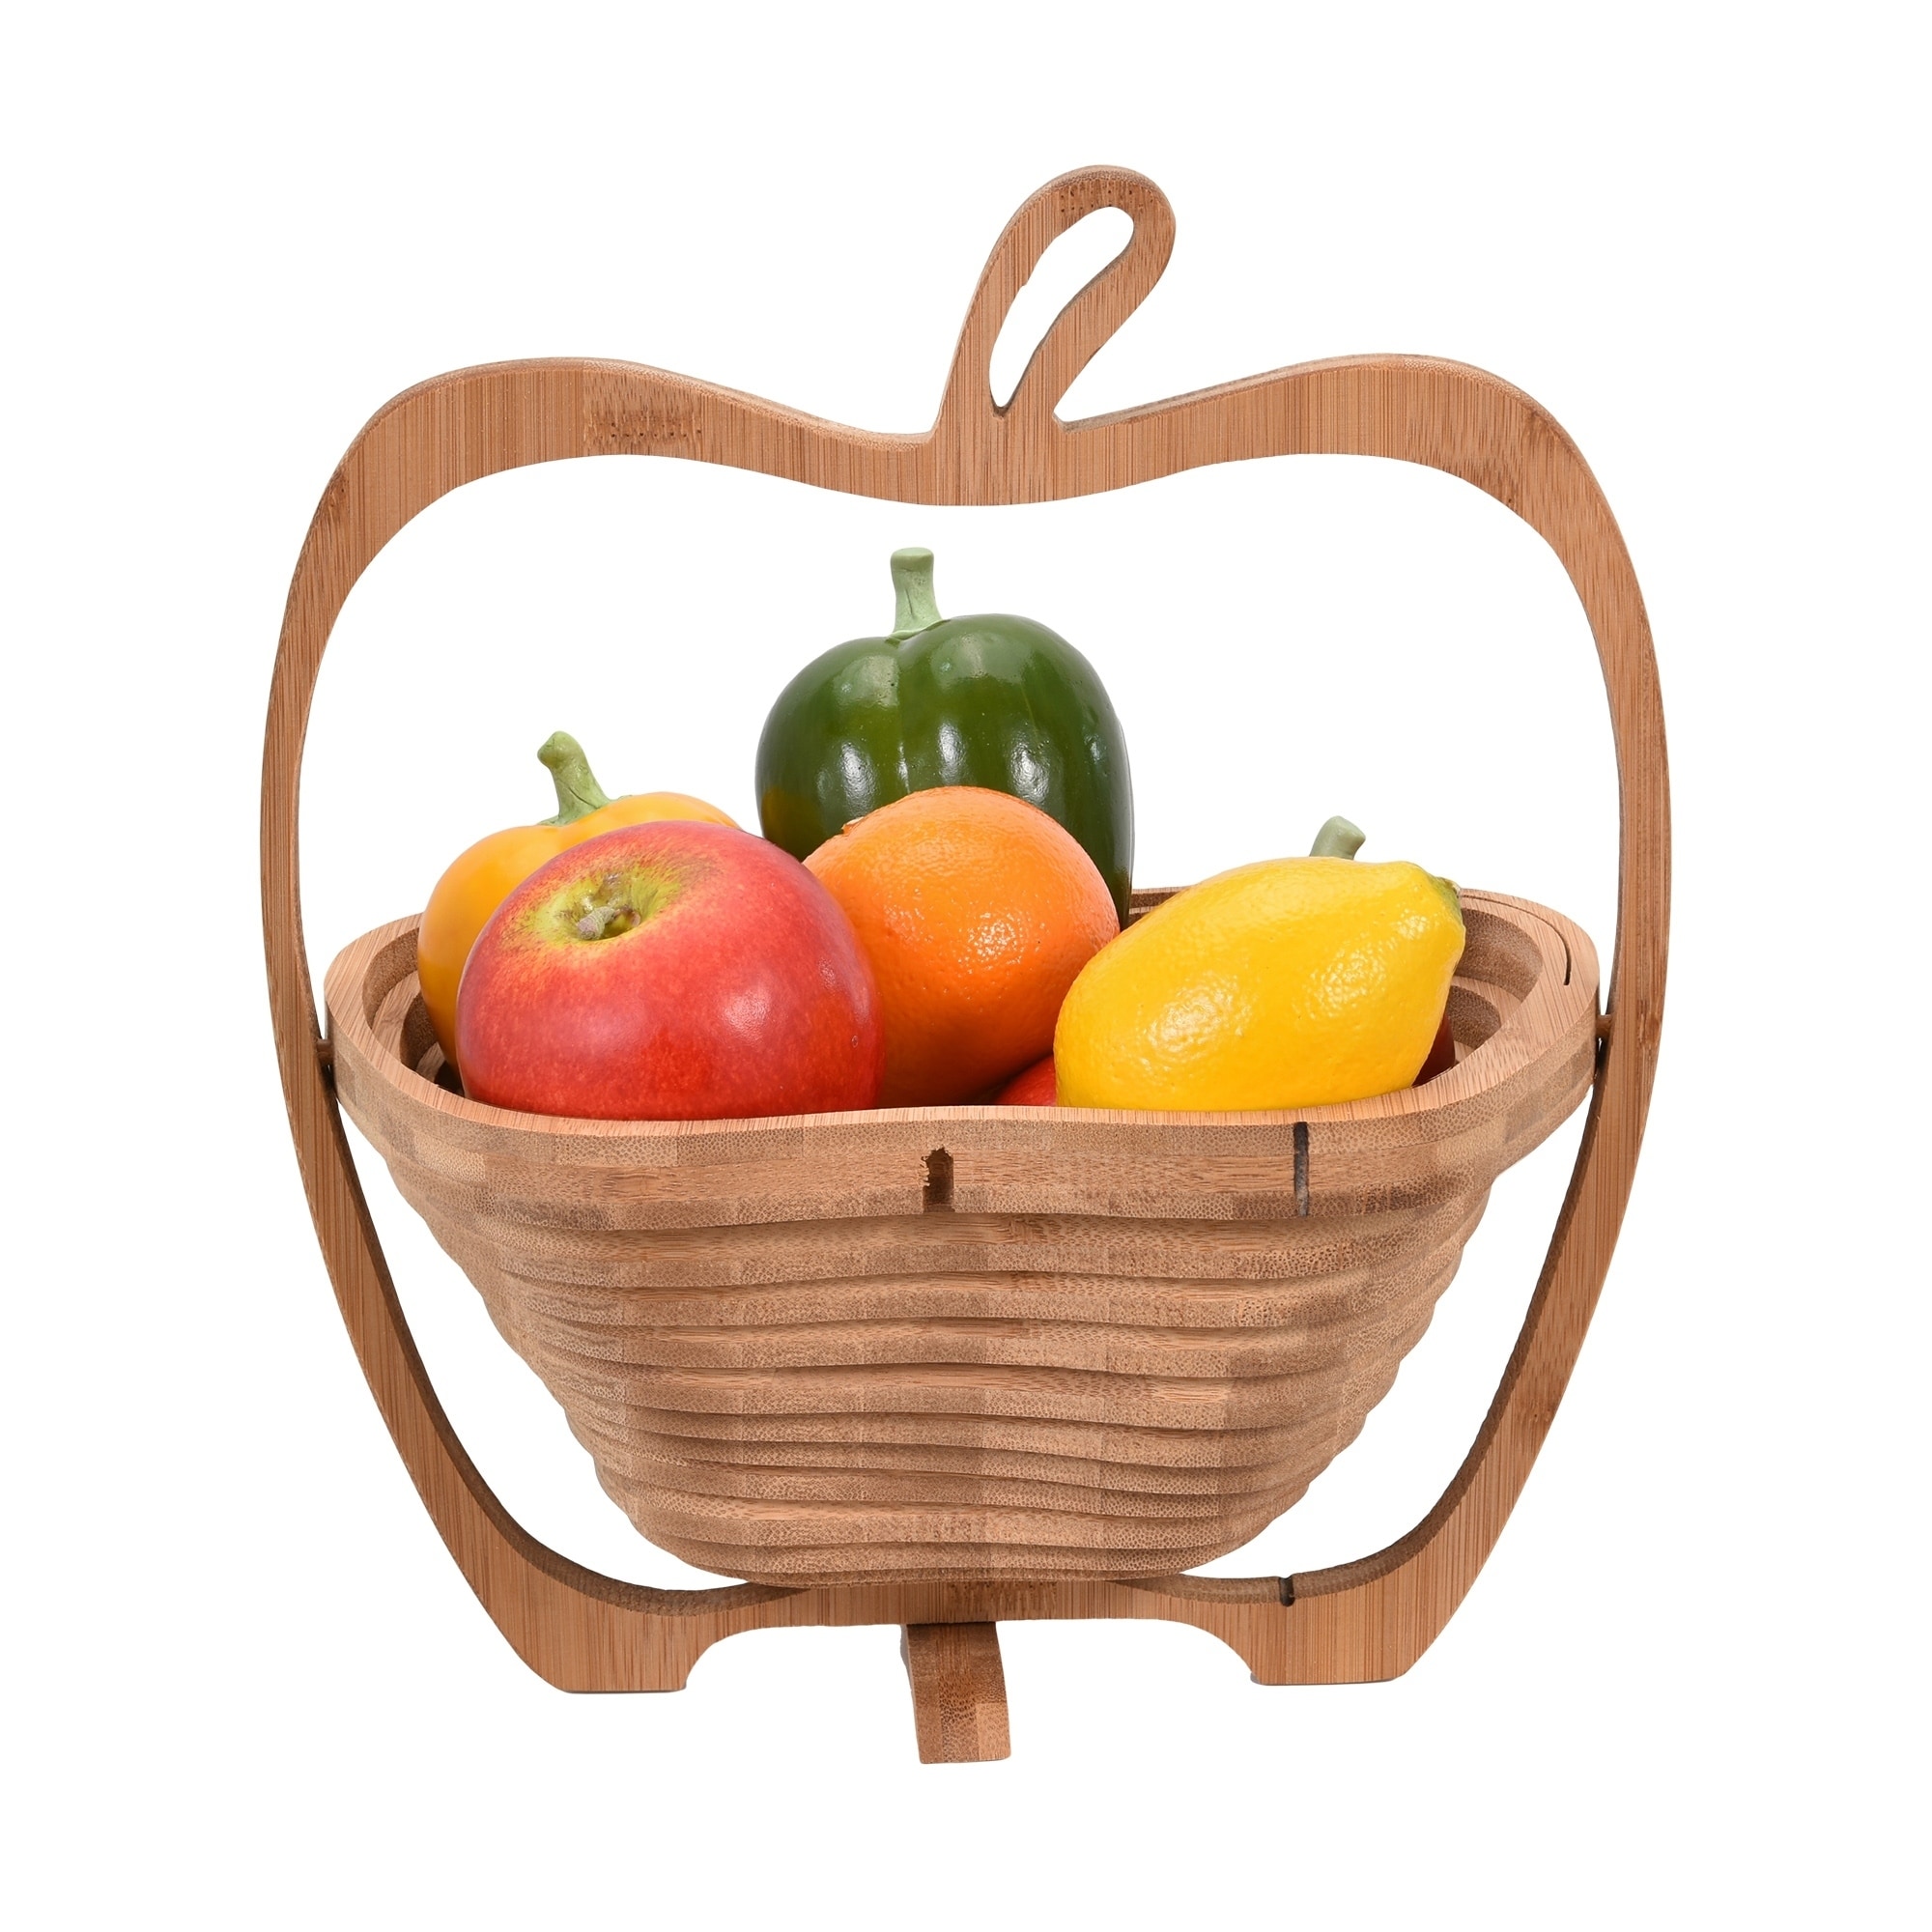 2 In 1 Collapsible Apple Shaped Bamboo Fruit Bowl Basket Cutting Board Coaster